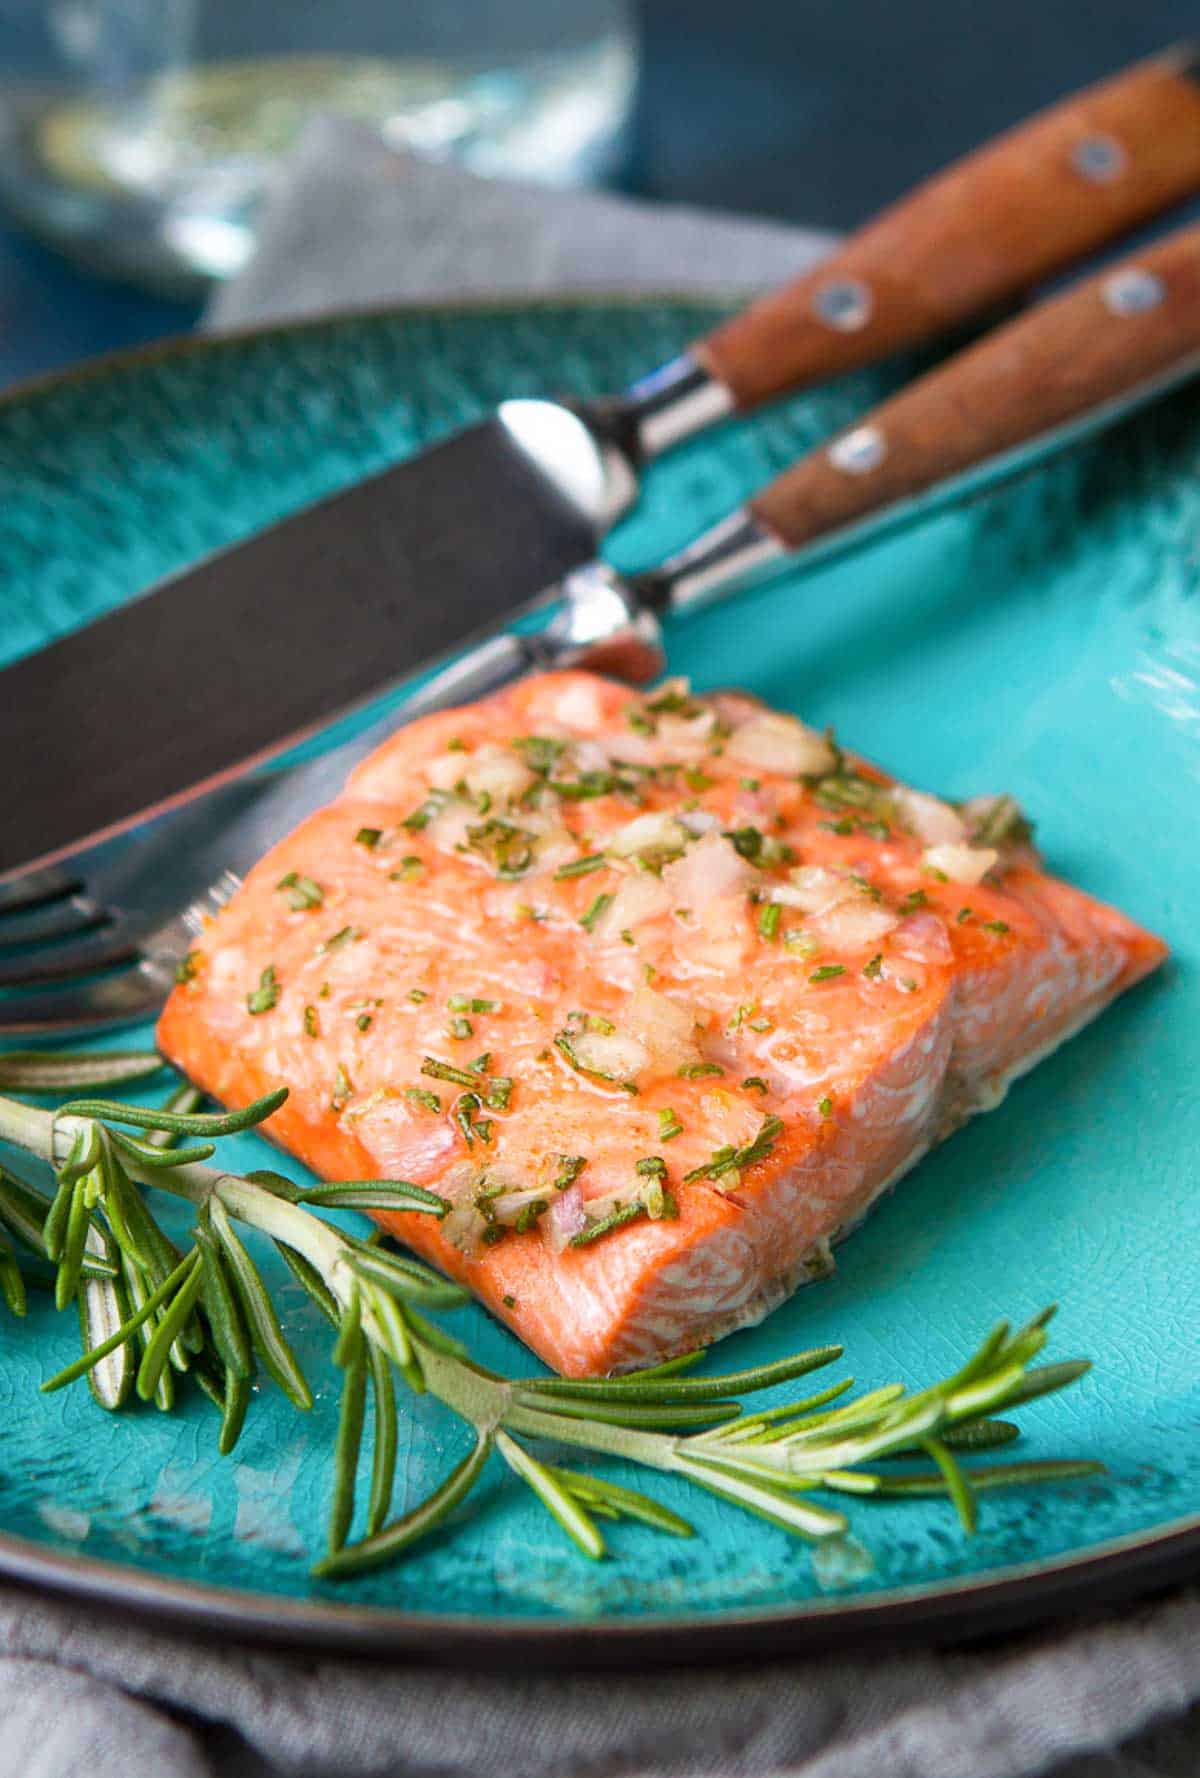 Glazed salmon fillet on a blue plate with a spring of rosemary.